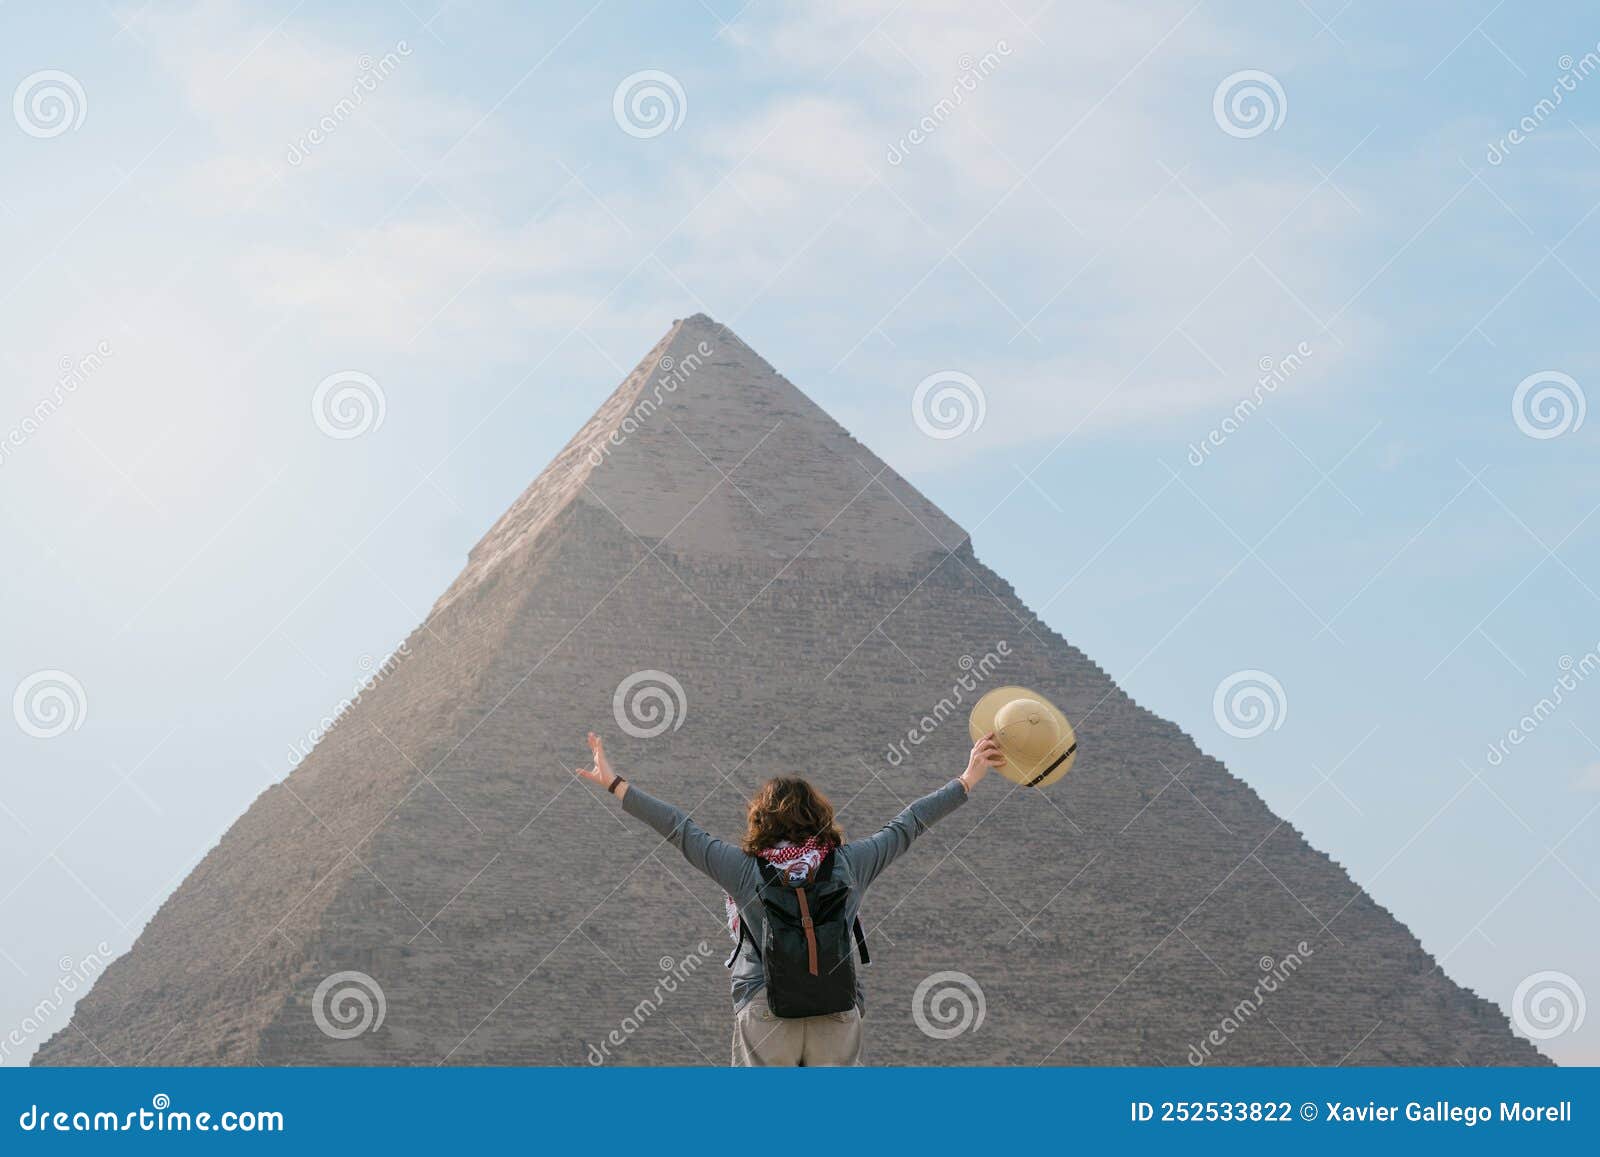 back view of tourist woman standing in front of a pyramid. egypt, cairo - giza